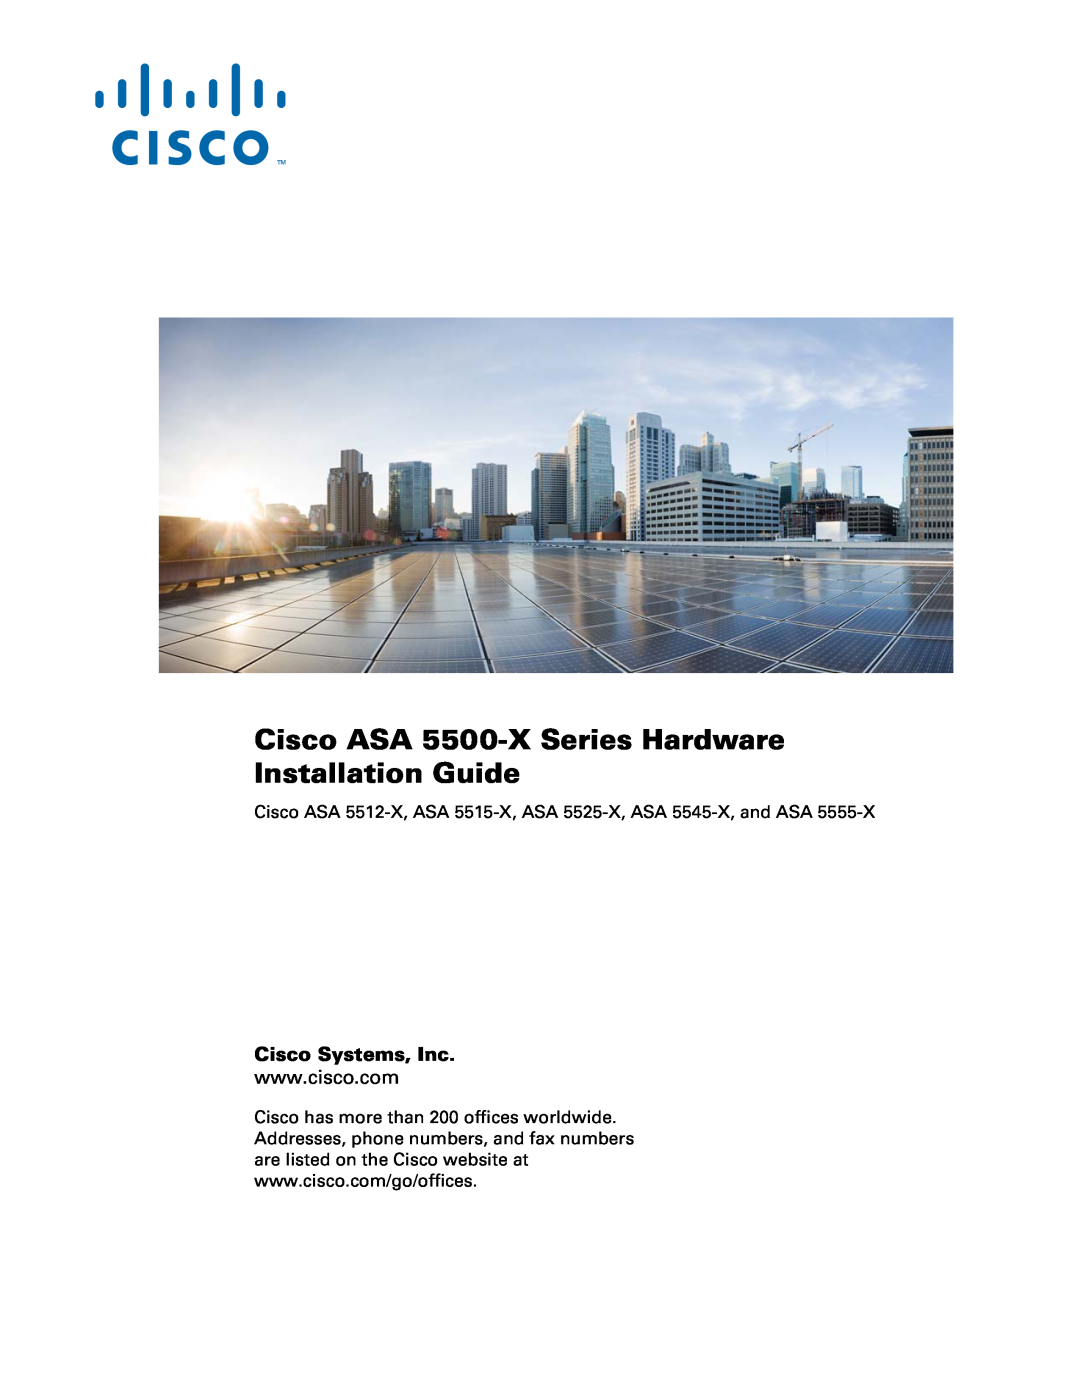 Cisco Systems kygjygcjgf manual Cisco Systems, Inc, Cisco ASA 5512-X, ASA 5515-X, ASA 5525-X, ASA 5545-X, and ASA 